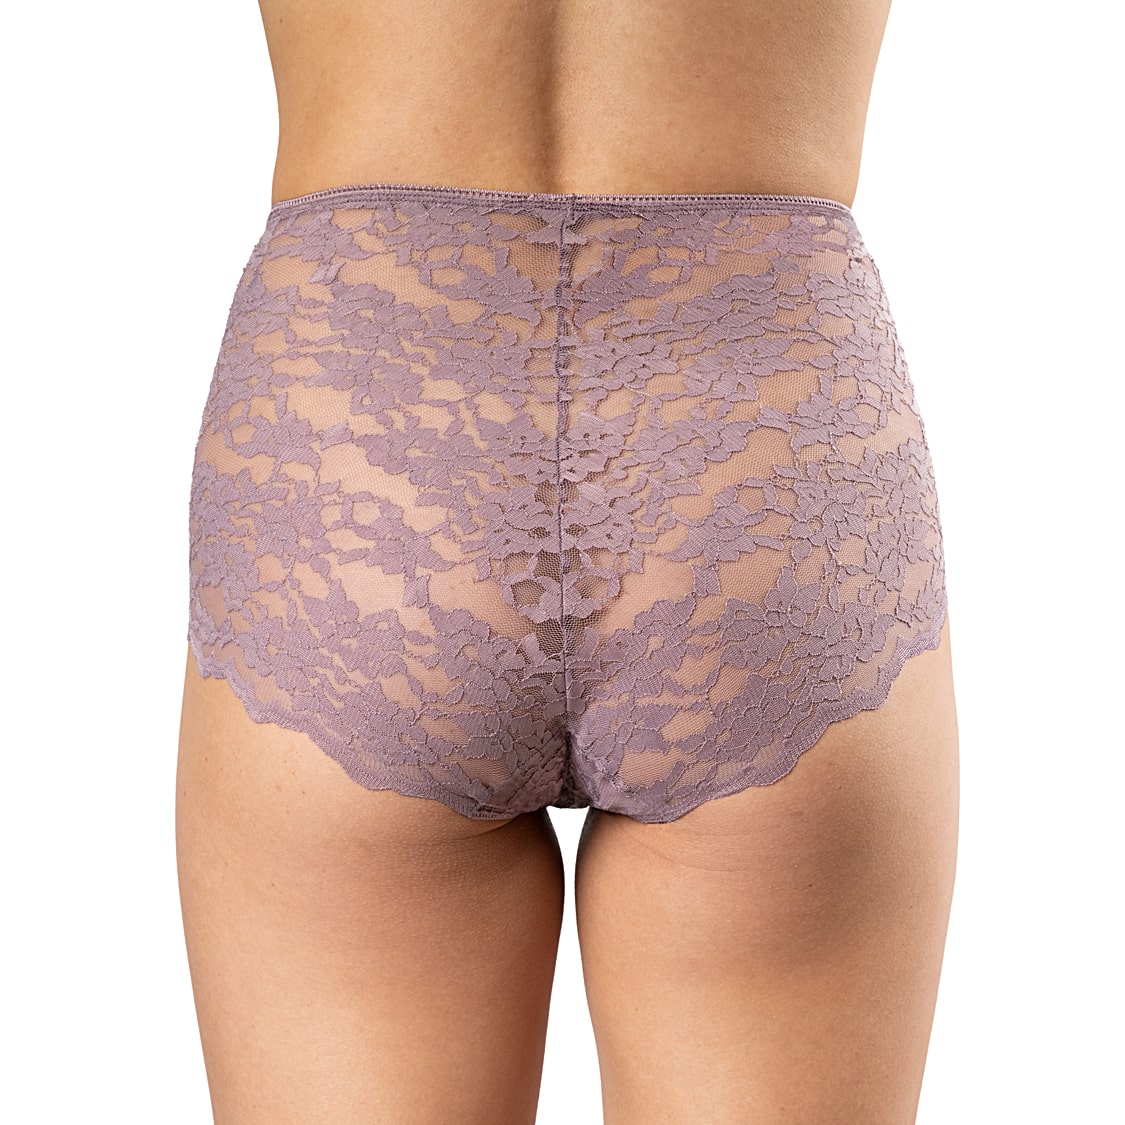 Amethyst High Waisted Underwear: Flatter Your Figure and Feel Confident